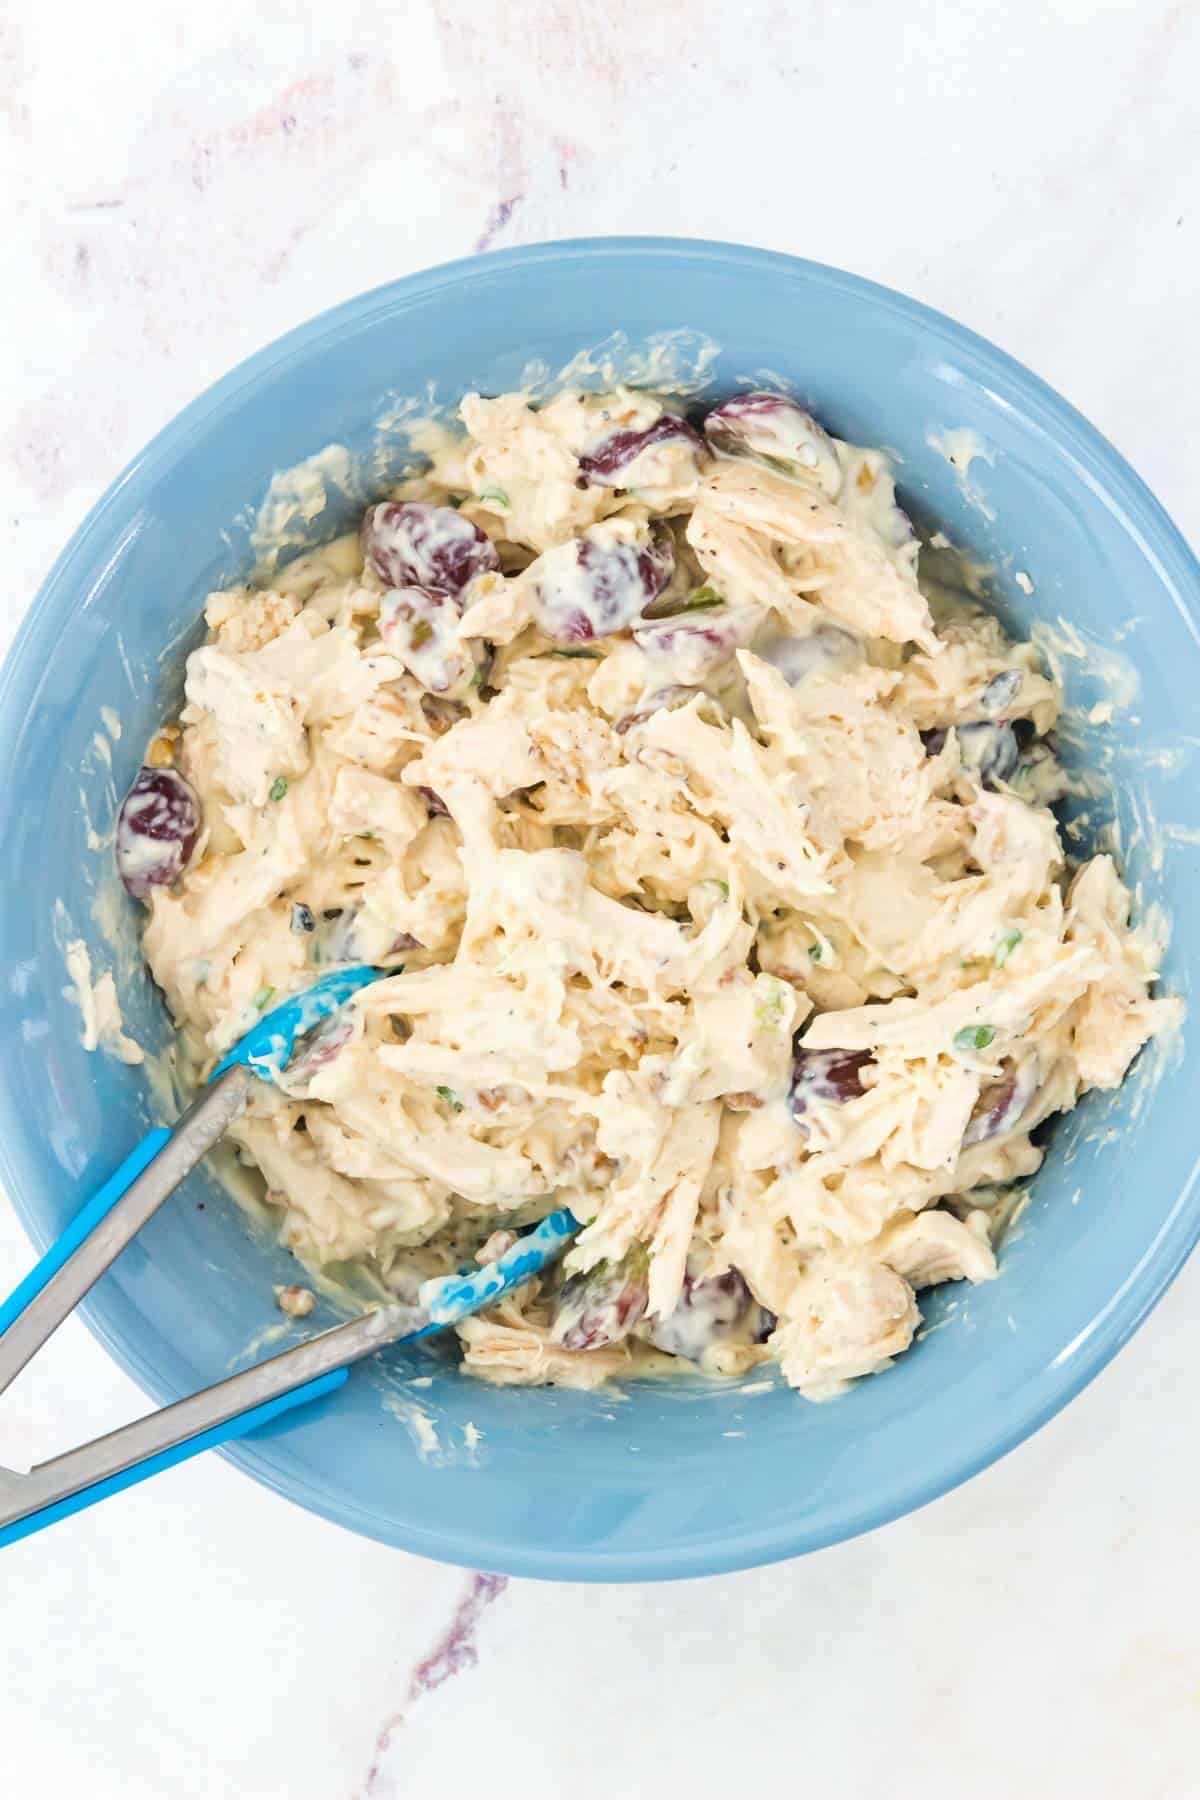 Tongs in a blue bowl of chicken salad.